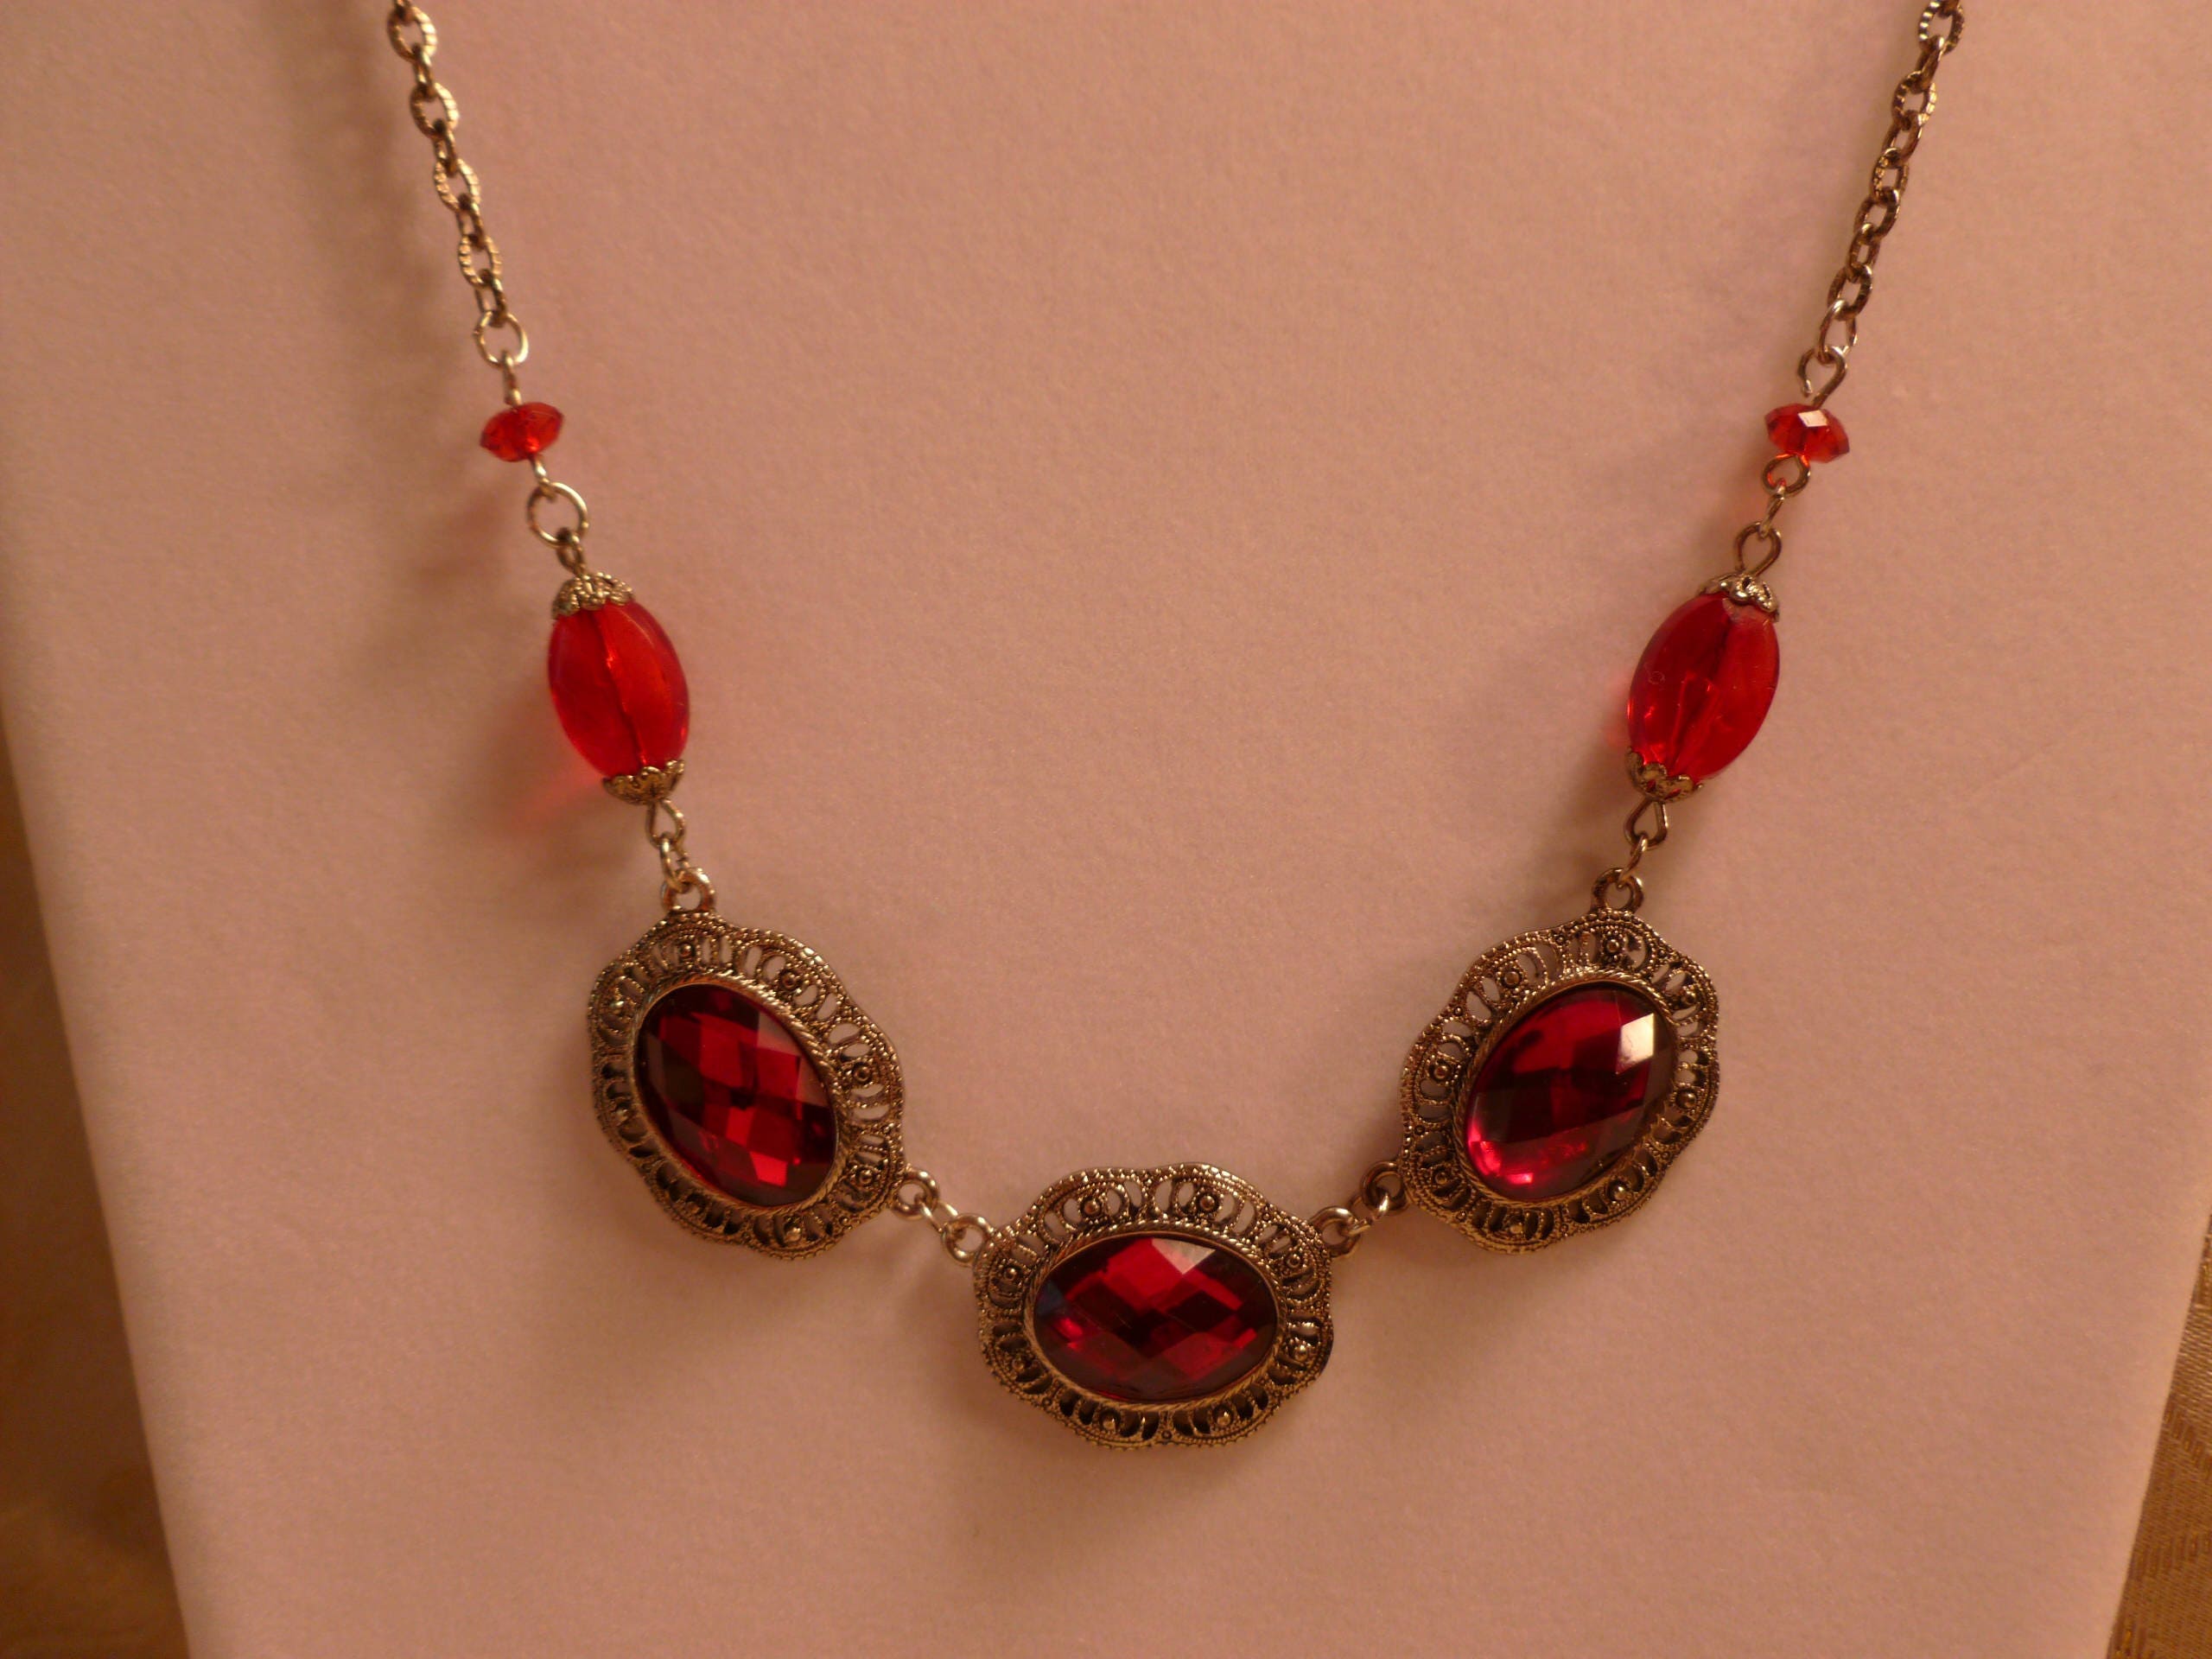 Vintage Elegant Red Crystal Necklace From The 1928 Jewelry Company ...